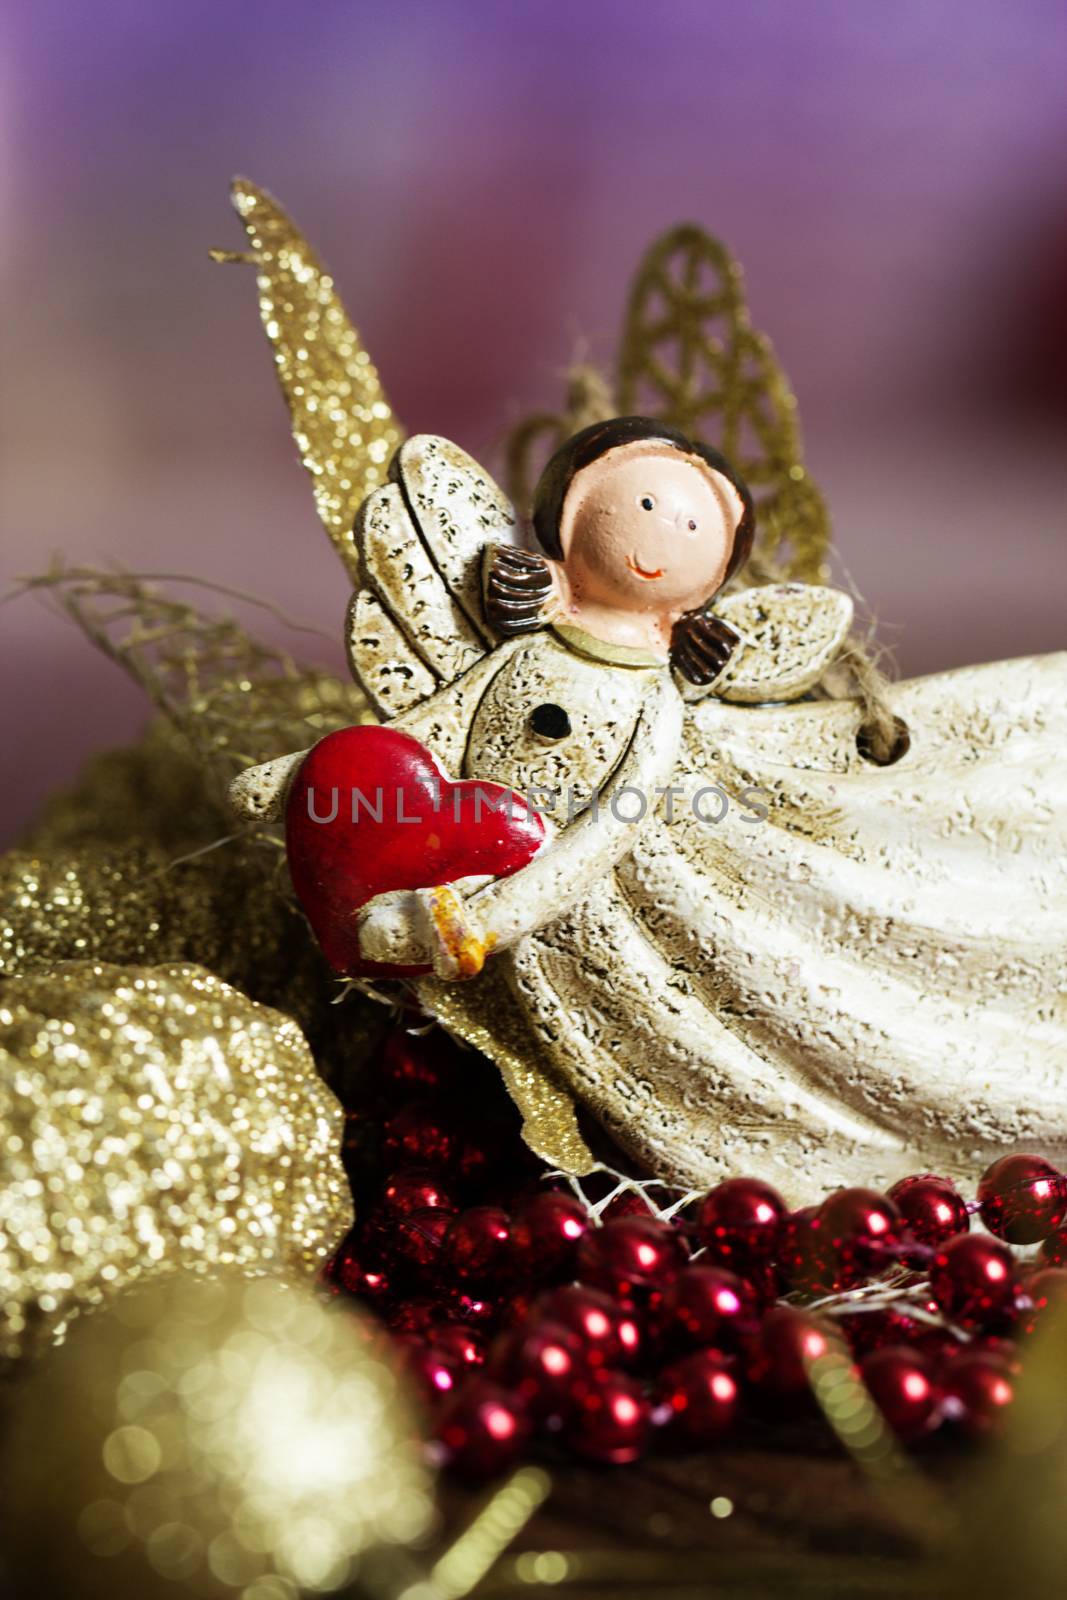 vintage toy angel.Angel toy with a heart in hand on a Christmas background. Christmas card. Christmas decoration.